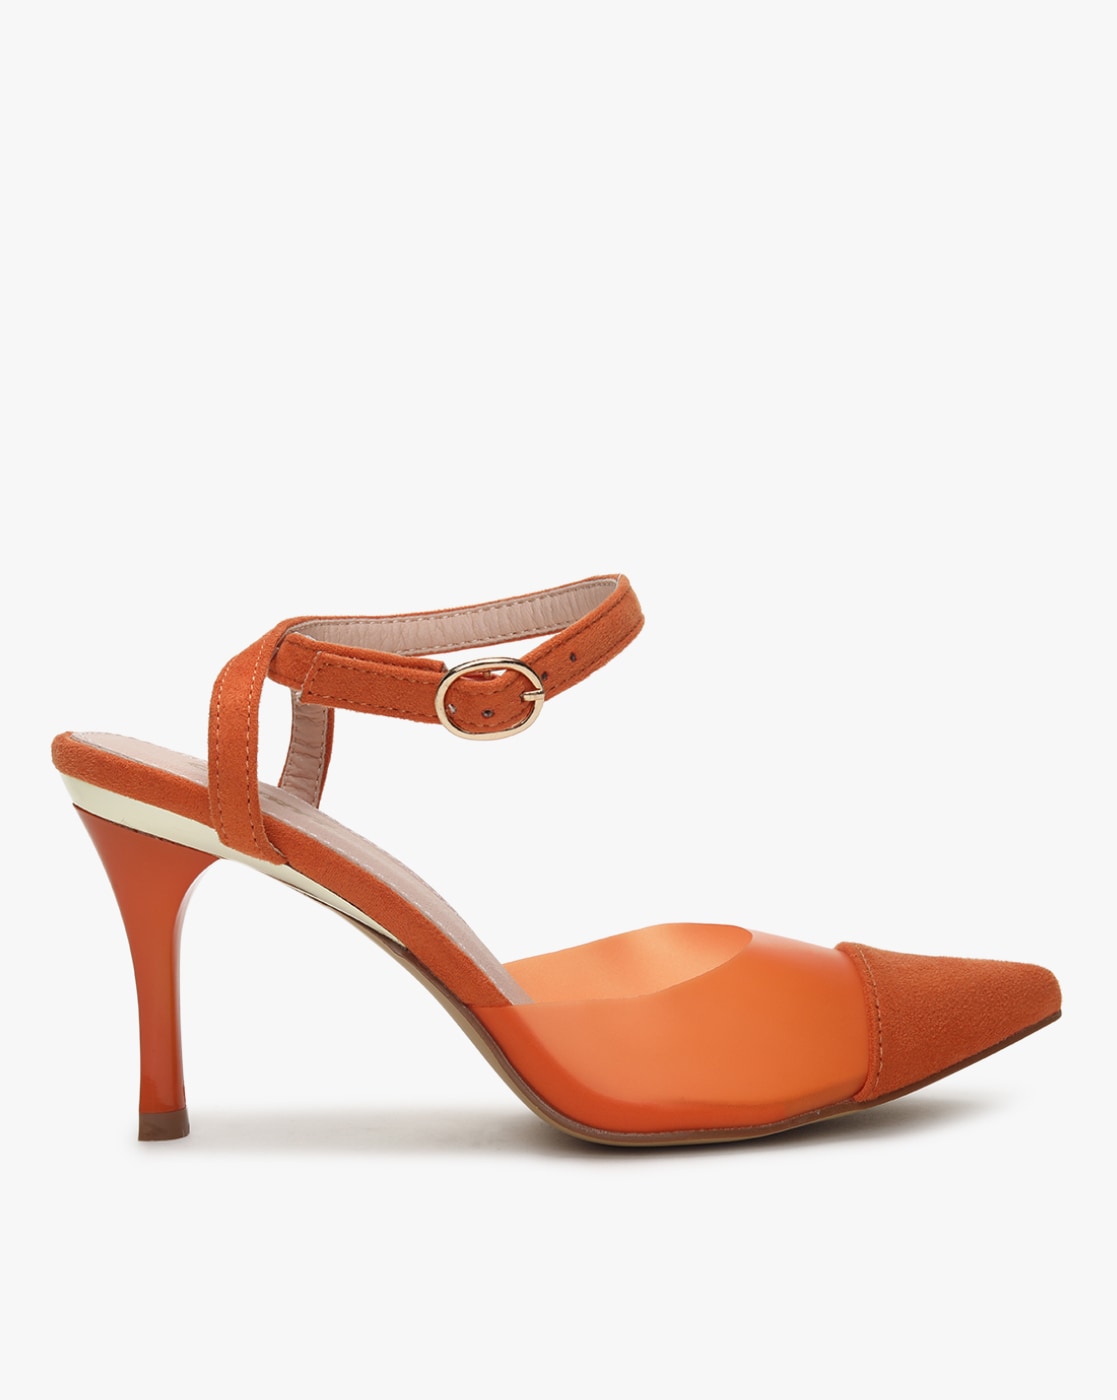 Ria Recommends : OUTRYT Ankle-Strap Pointed-Toe Stilettos